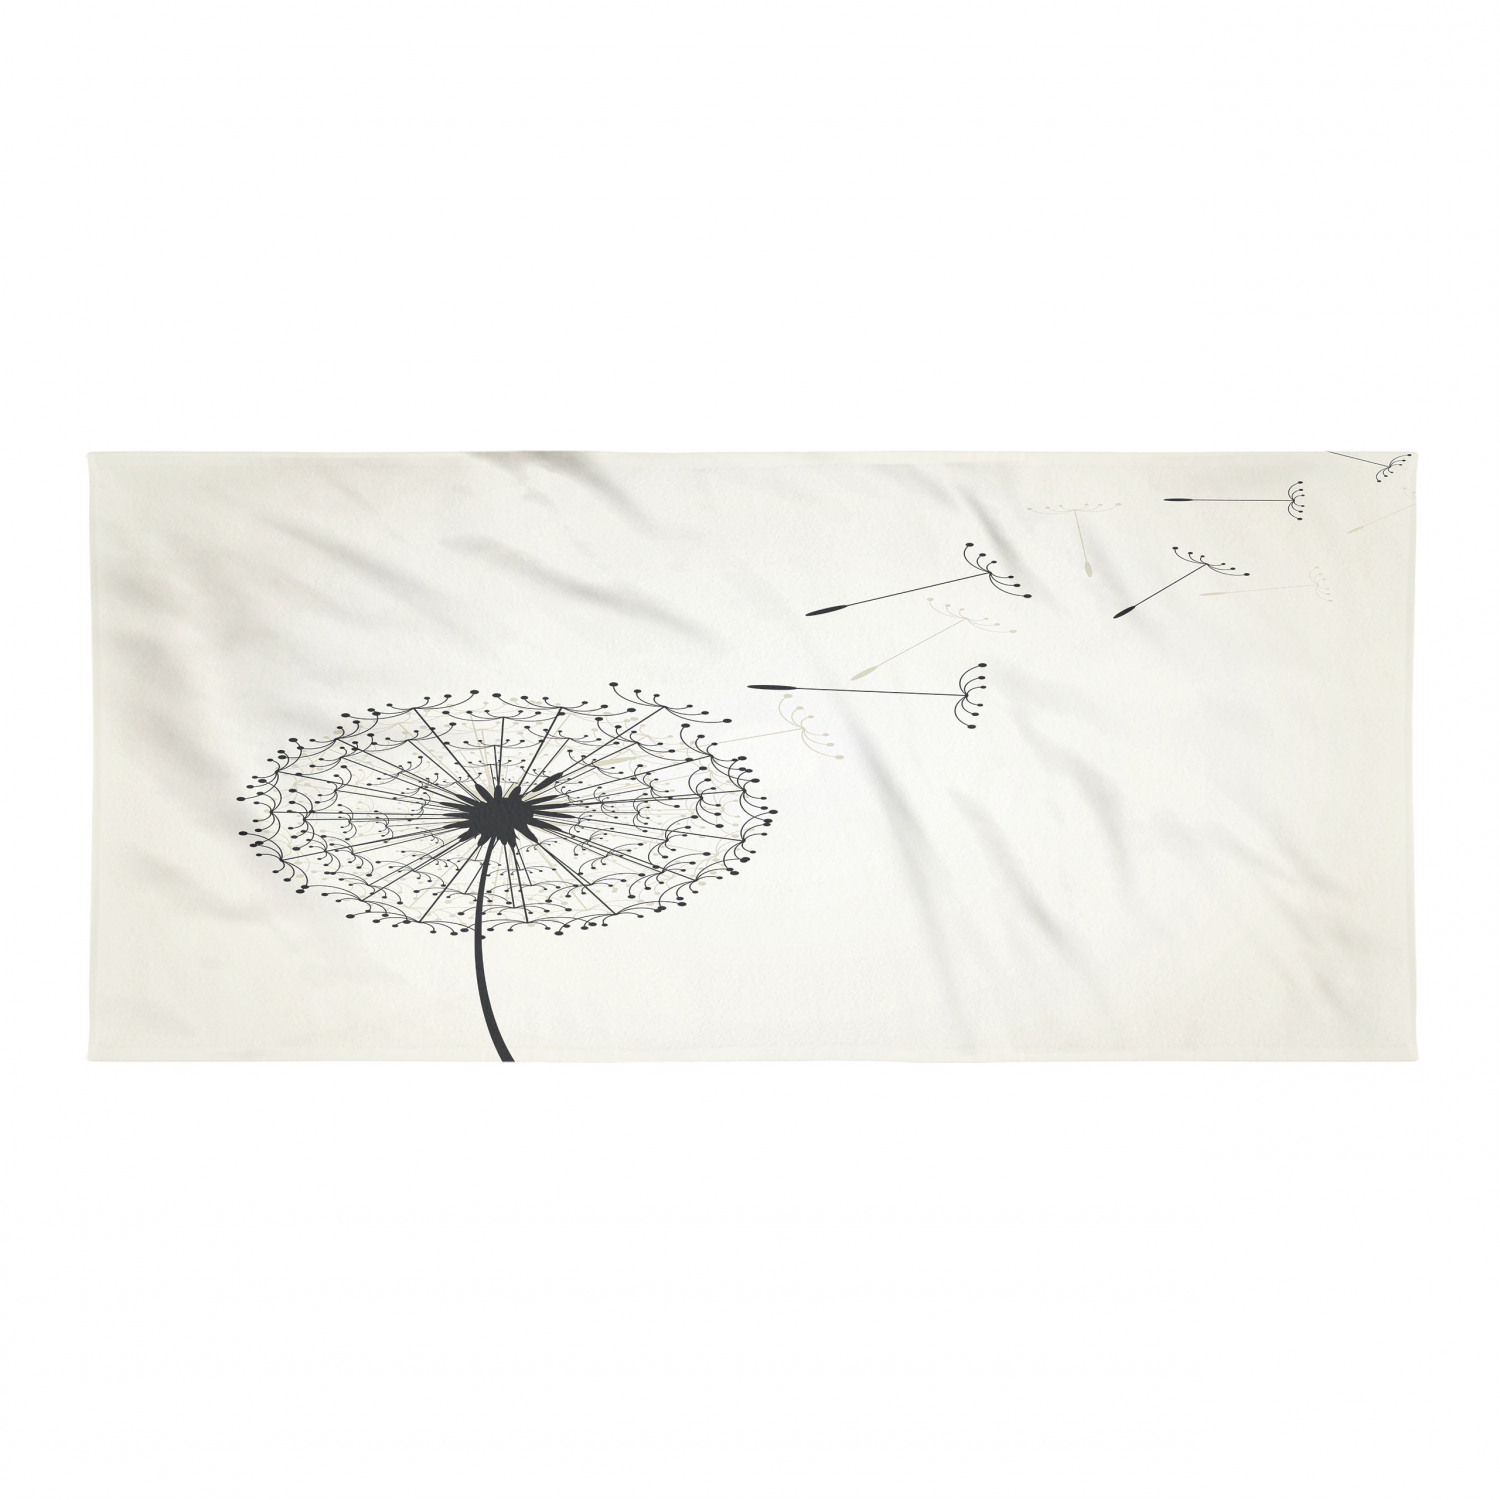 Dandelion Backpacking Towel, Flying Flower and Blossom Fragility and Growth Inspired by Nature, Quick Dry Soft Absorbent Compact Microfiber for Camping Hiking, Black and Beige, by Ambesonne - image 1 of 2